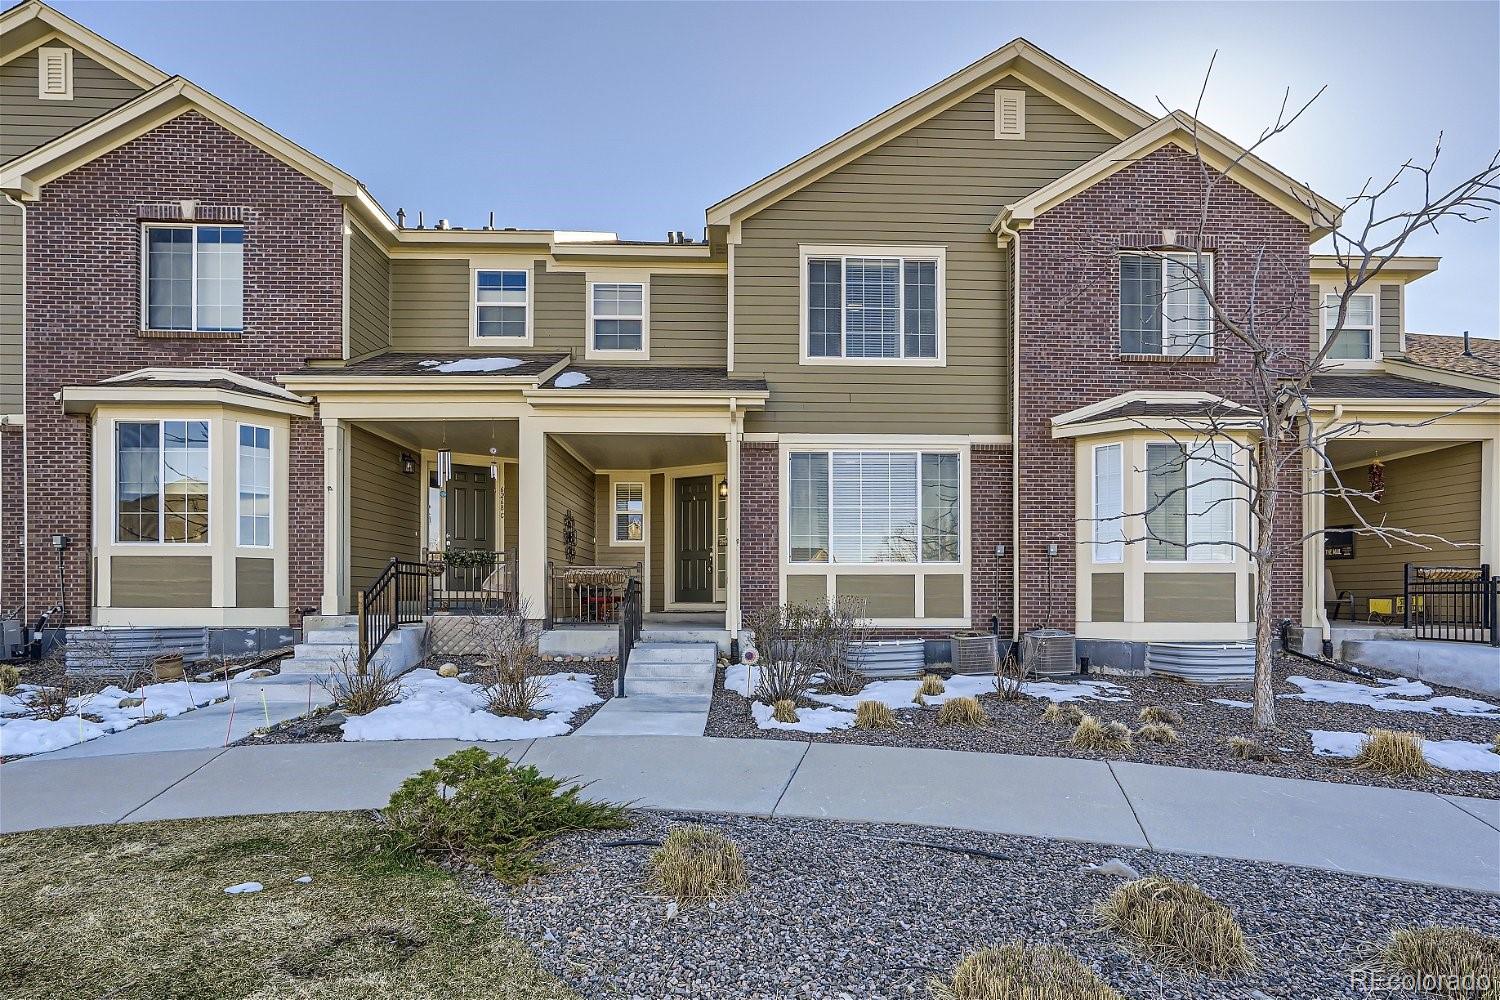 6268  Pike Court, arvada MLS: 9112111 Beds: 3 Baths: 3 Price: $644,000